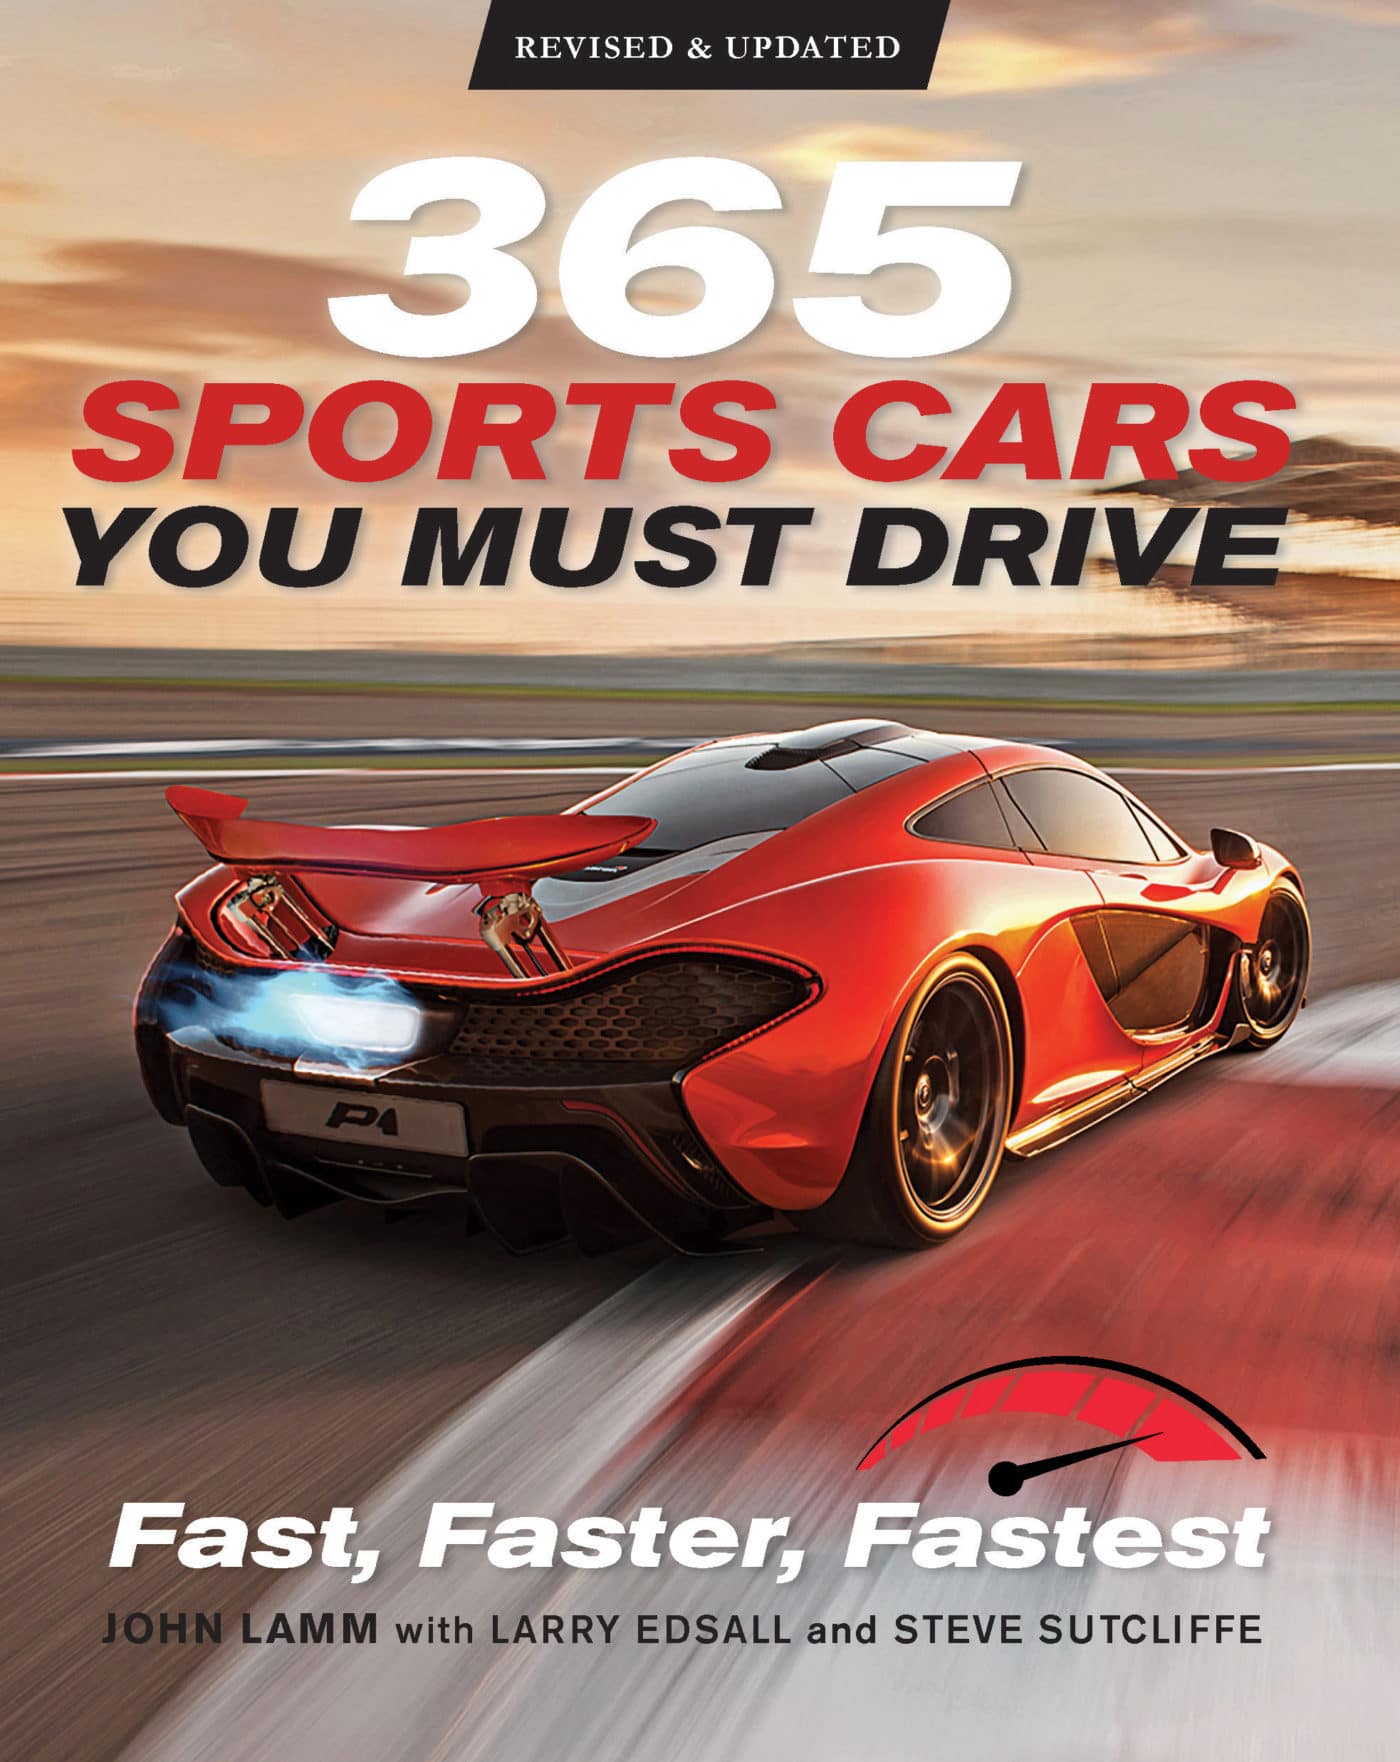 Automoblog Book Garage: 365 Sports Cars You Must Drive